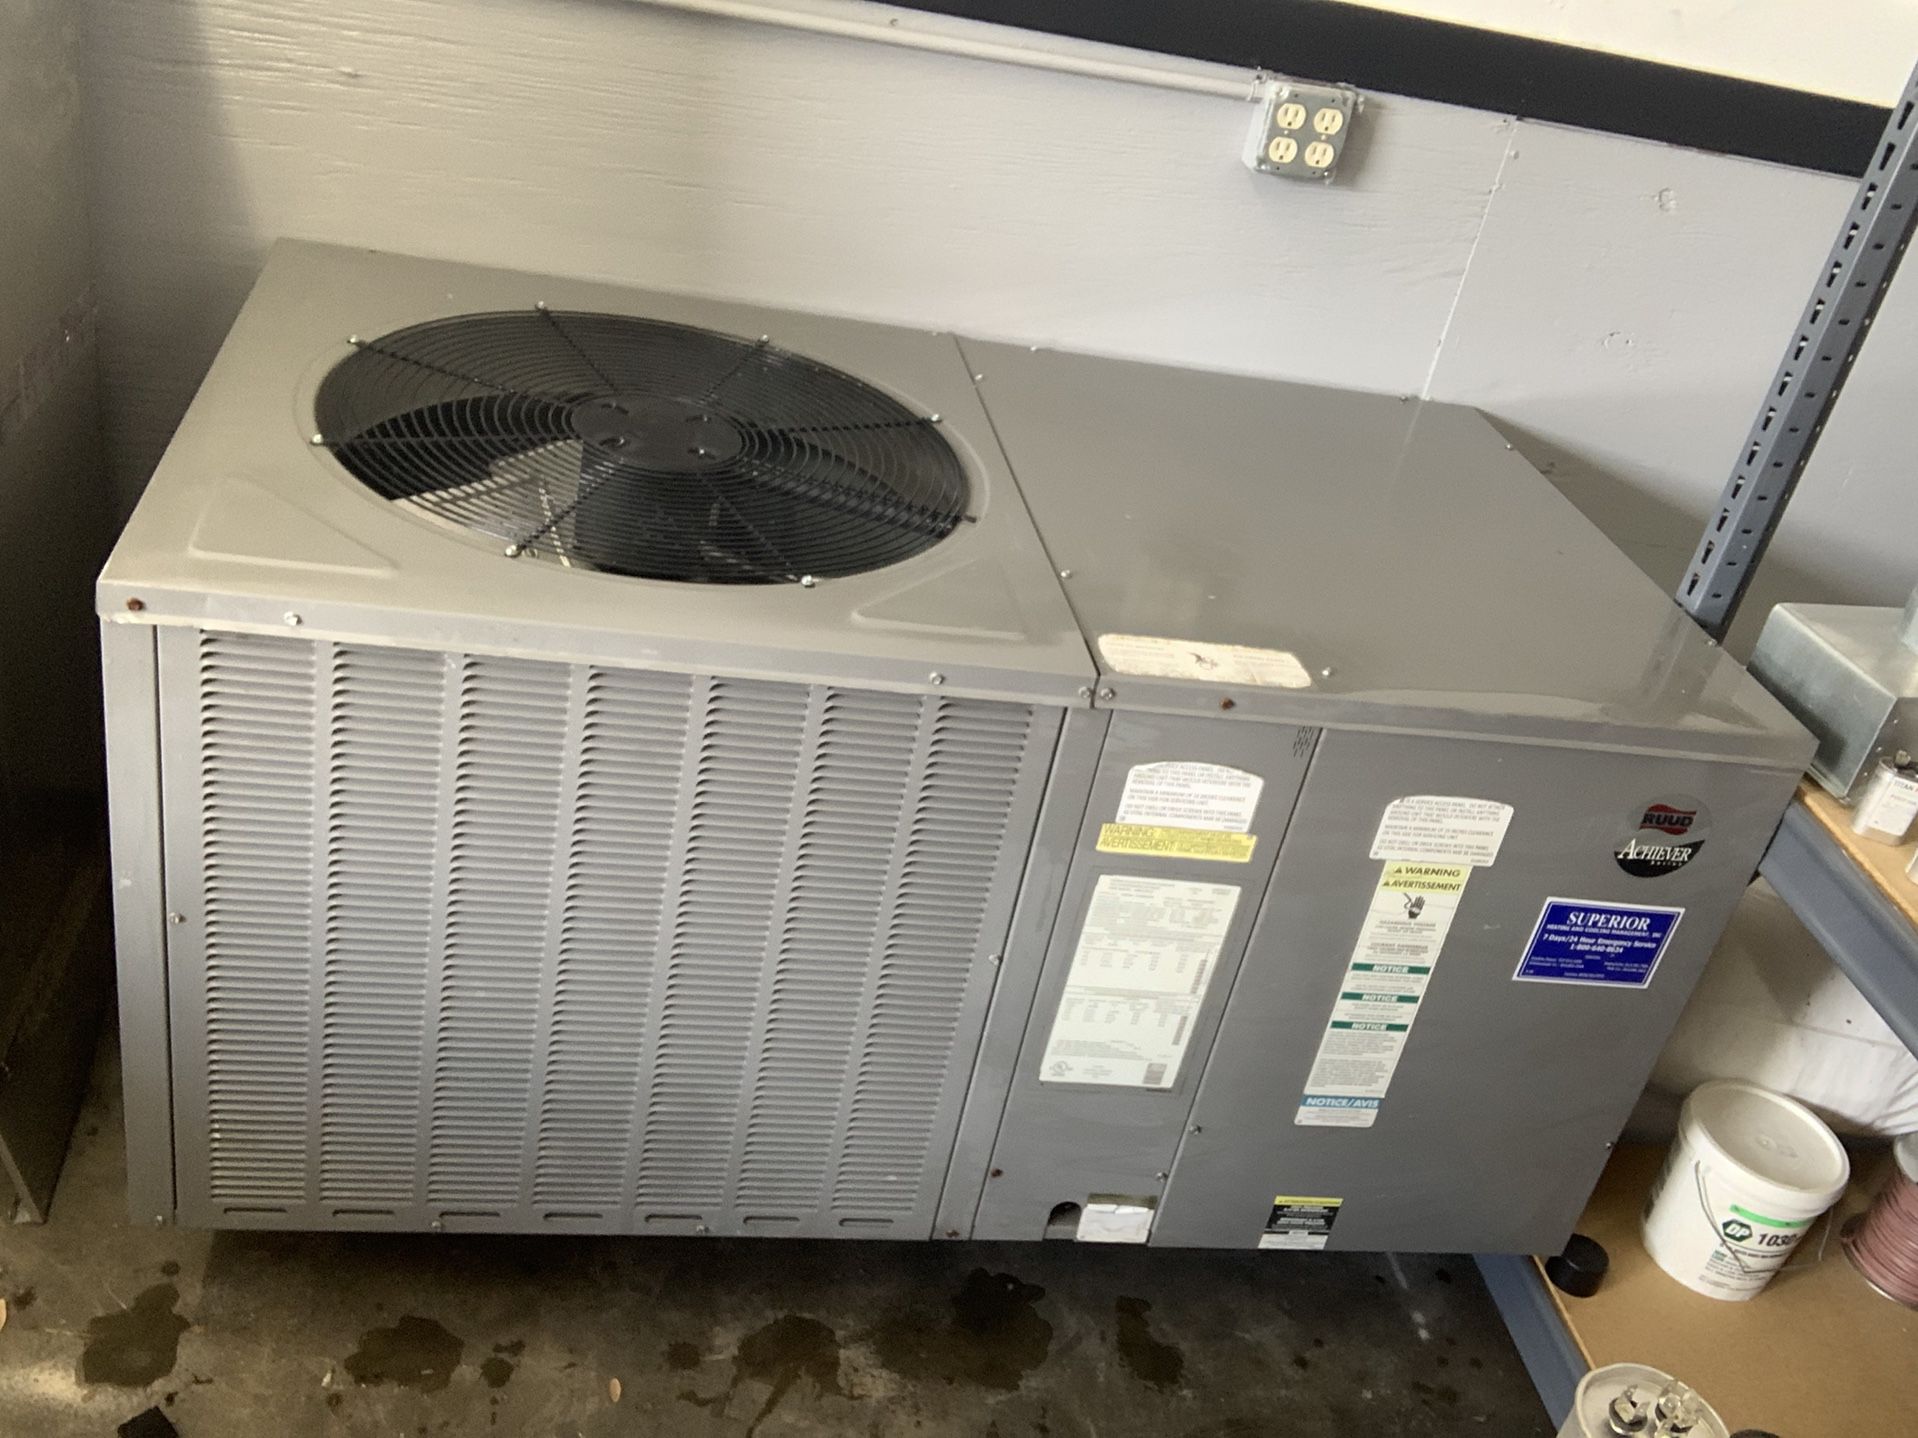 2.5 Ton Rheem Mobile home packaged unit AC air conditioner